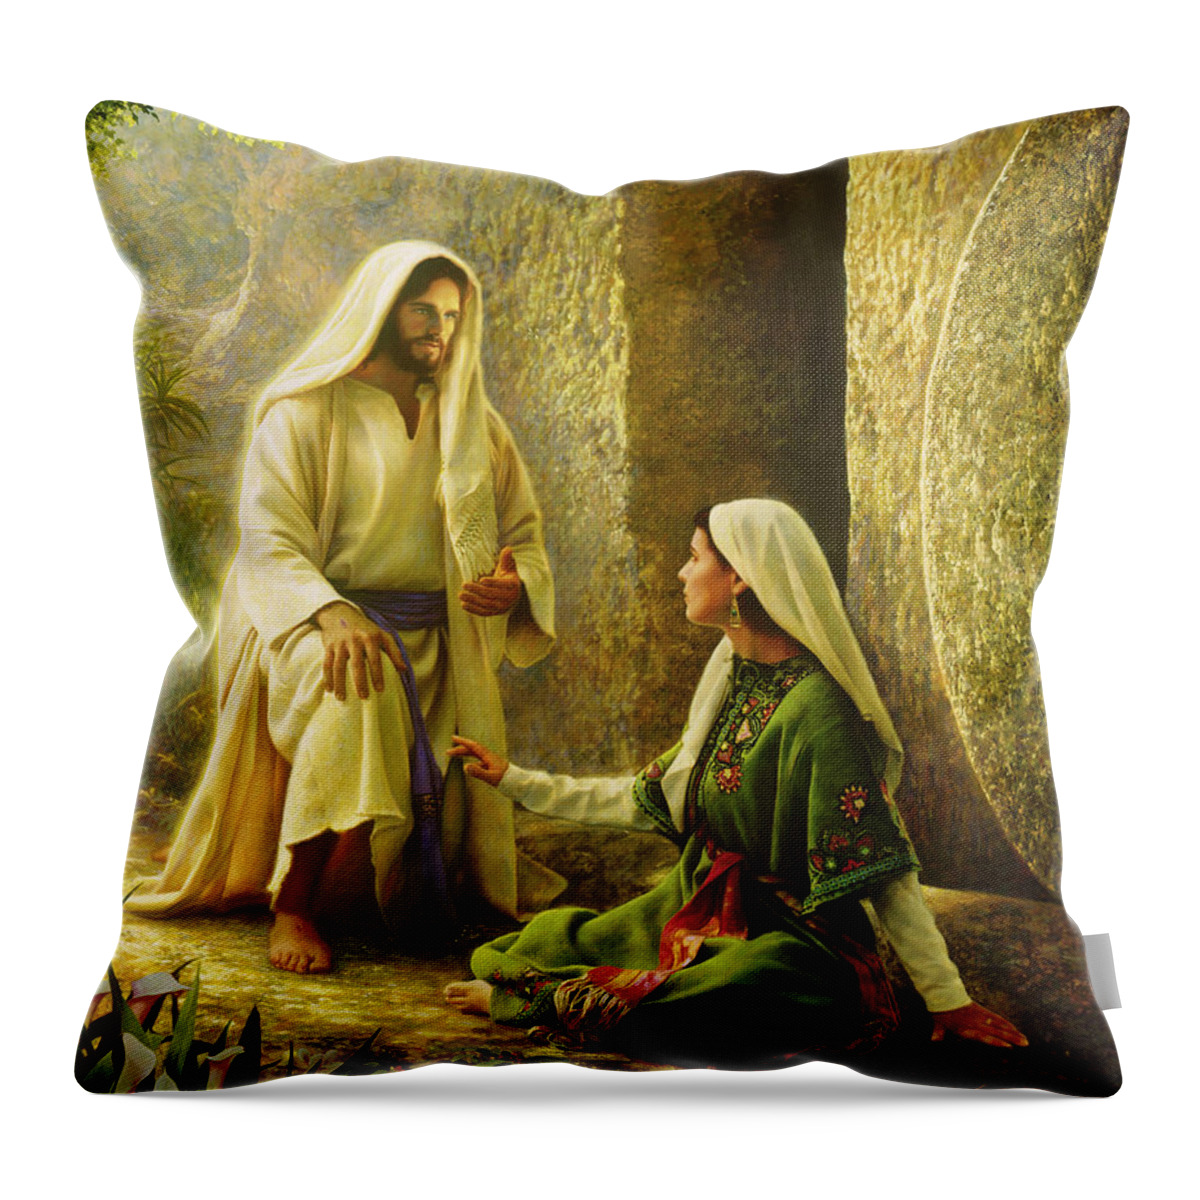 Jesus Throw Pillow featuring the painting He is Risen by Greg Olsen